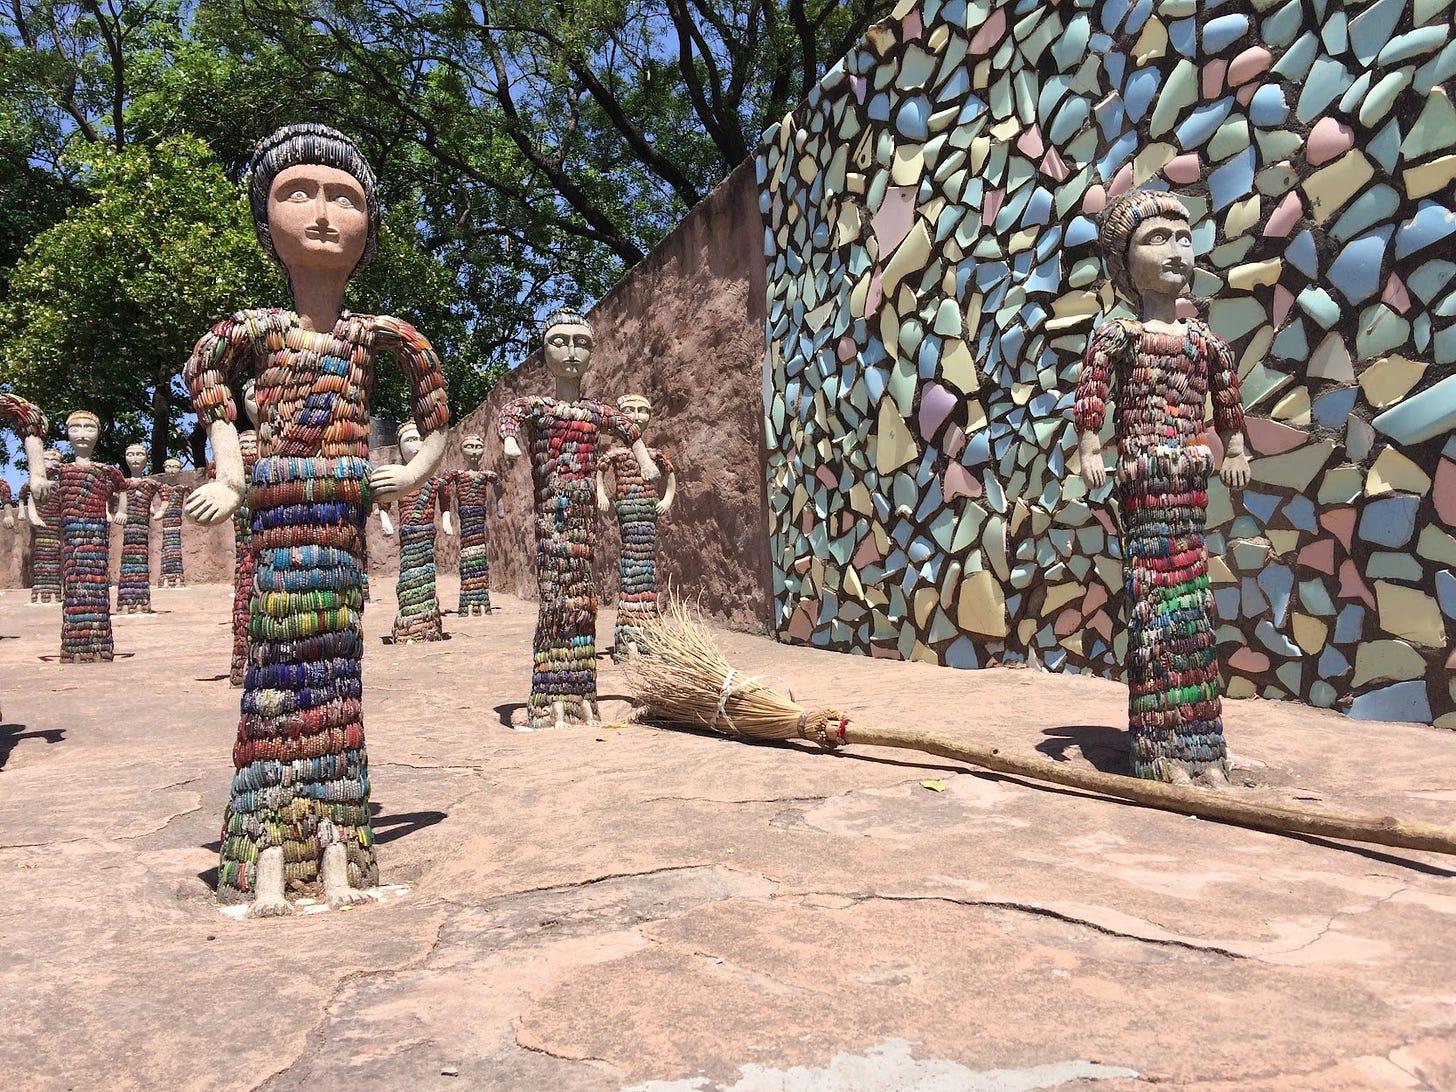 Photograph of a Rock Garden and open air art space in India. In the frame, you see several sculptures that are roughly three feet tall, made from waste materials such as broken bracelets and bangles in addition to clay